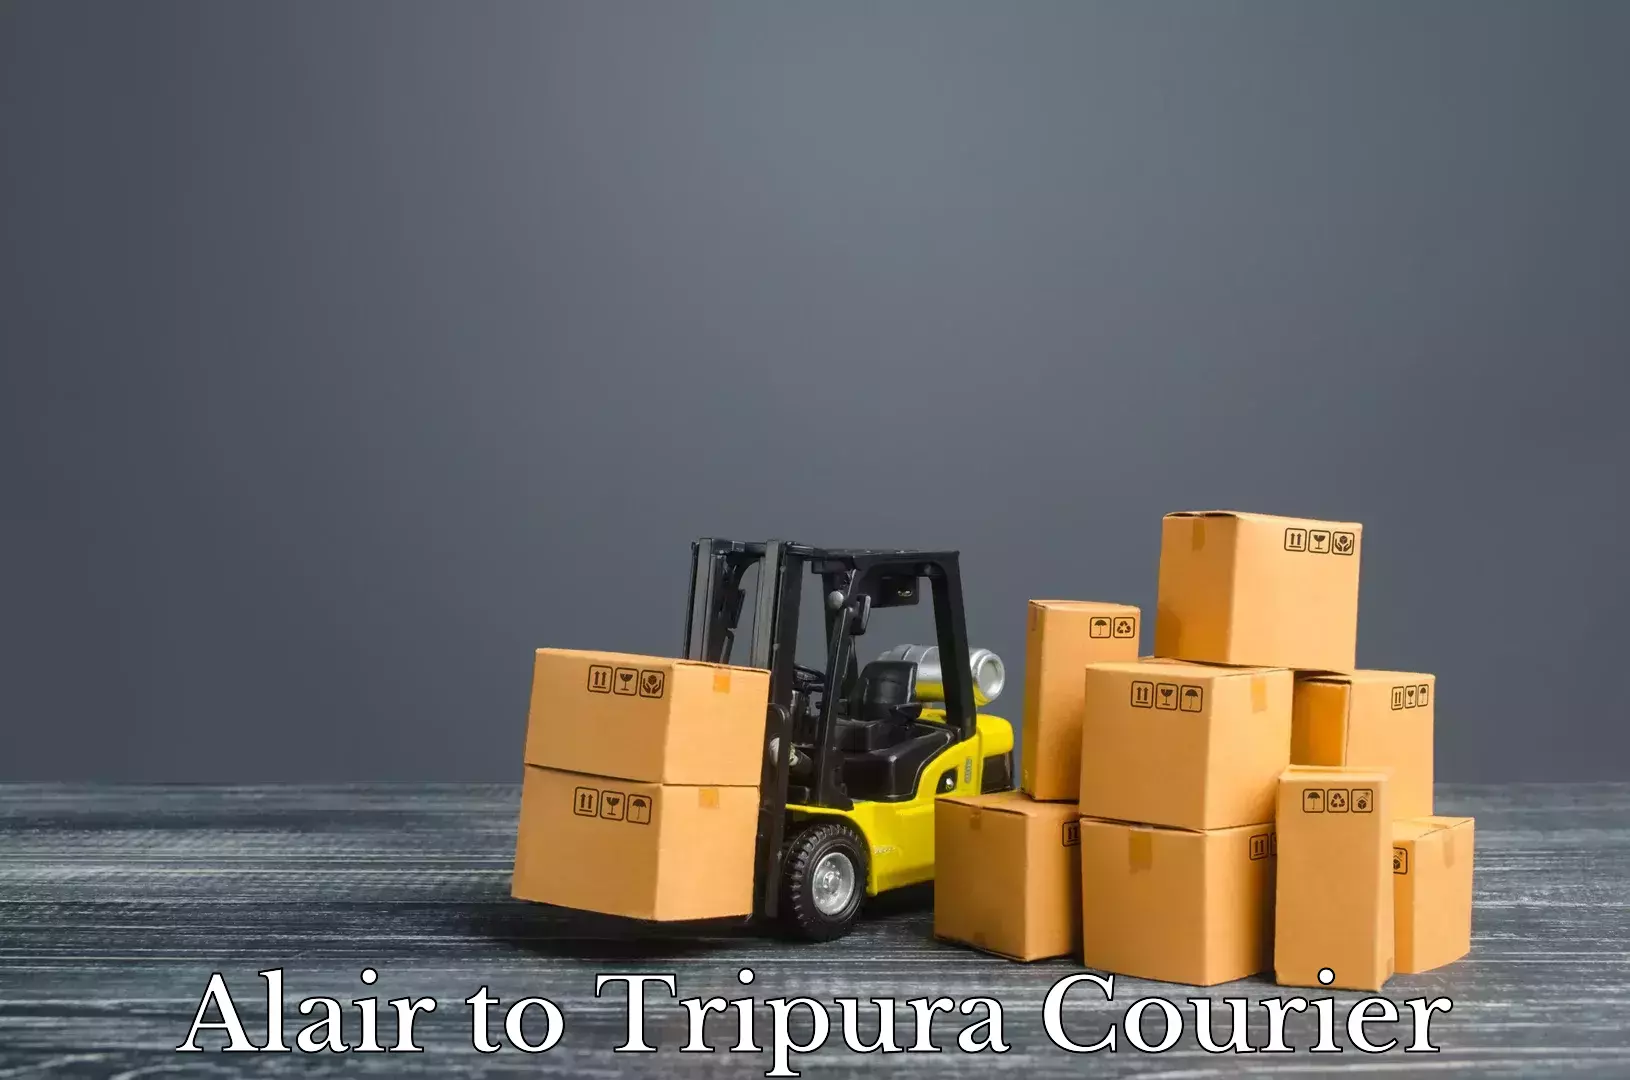 Luggage transport consulting Alair to West Tripura